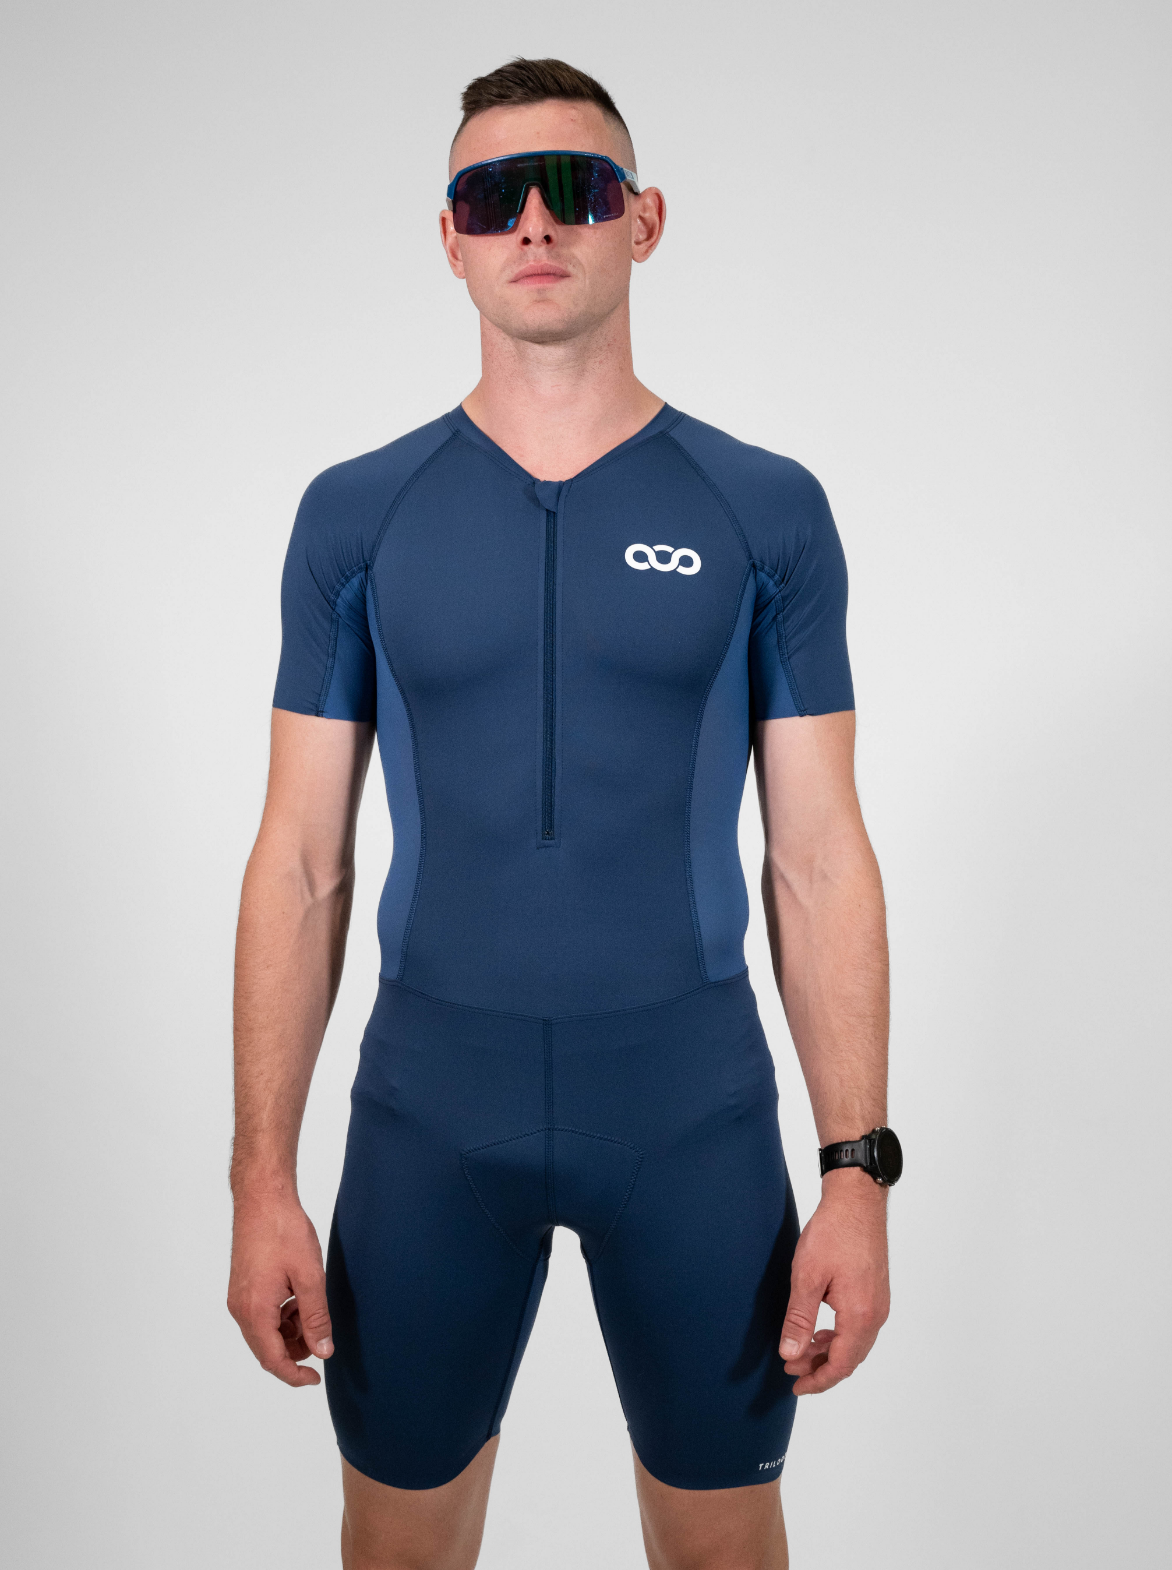 Trisuit recycled and Made in France — TOULON – Triloop